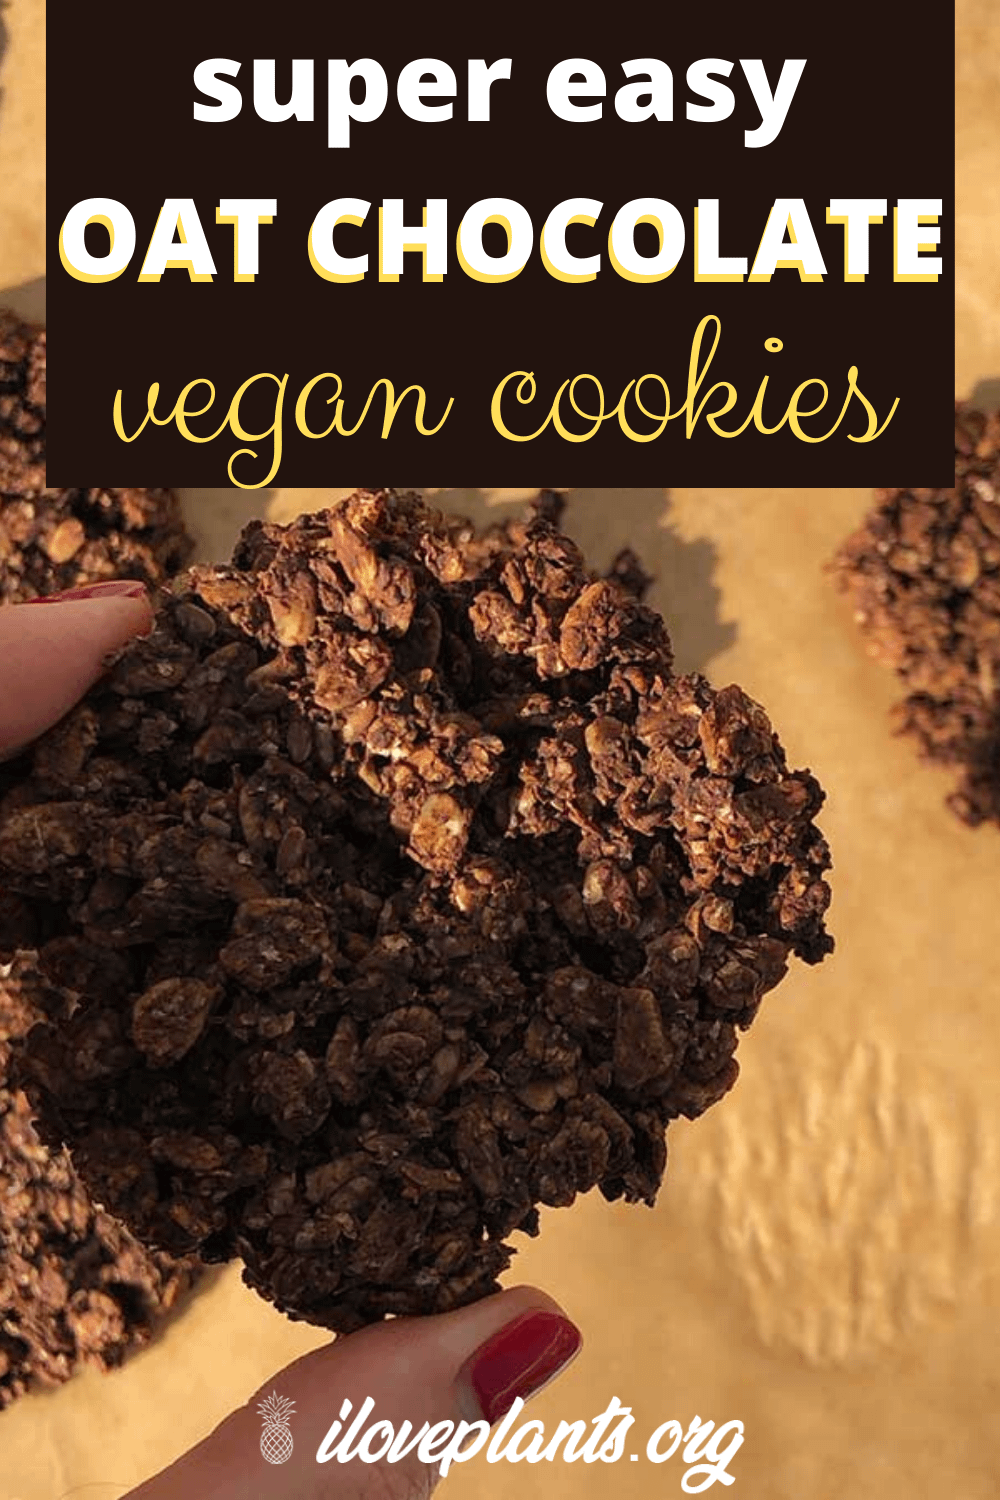 A vegan baking must-try! Oaty and chocolatey and delish! These entirely vegan plant-based cookies are SO moorish, everyone LOVES them. Only 5 ingredients, they are so easy to make! Click to see how easy this yummy recipe really is! #veganbaking #vegancooking #plantbasedrecipes